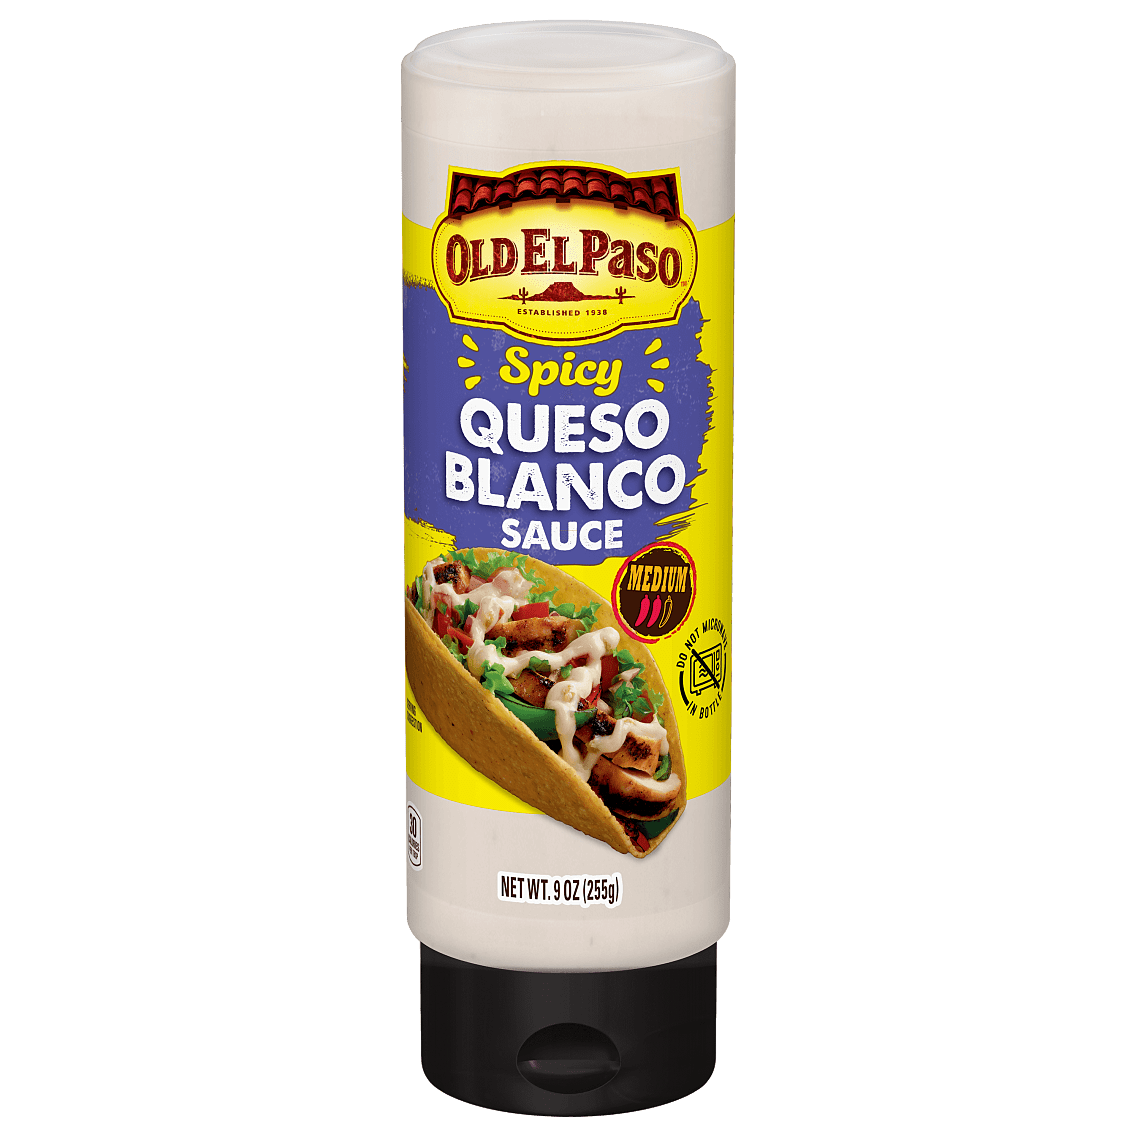 Spicy Queso Blanco Sauce